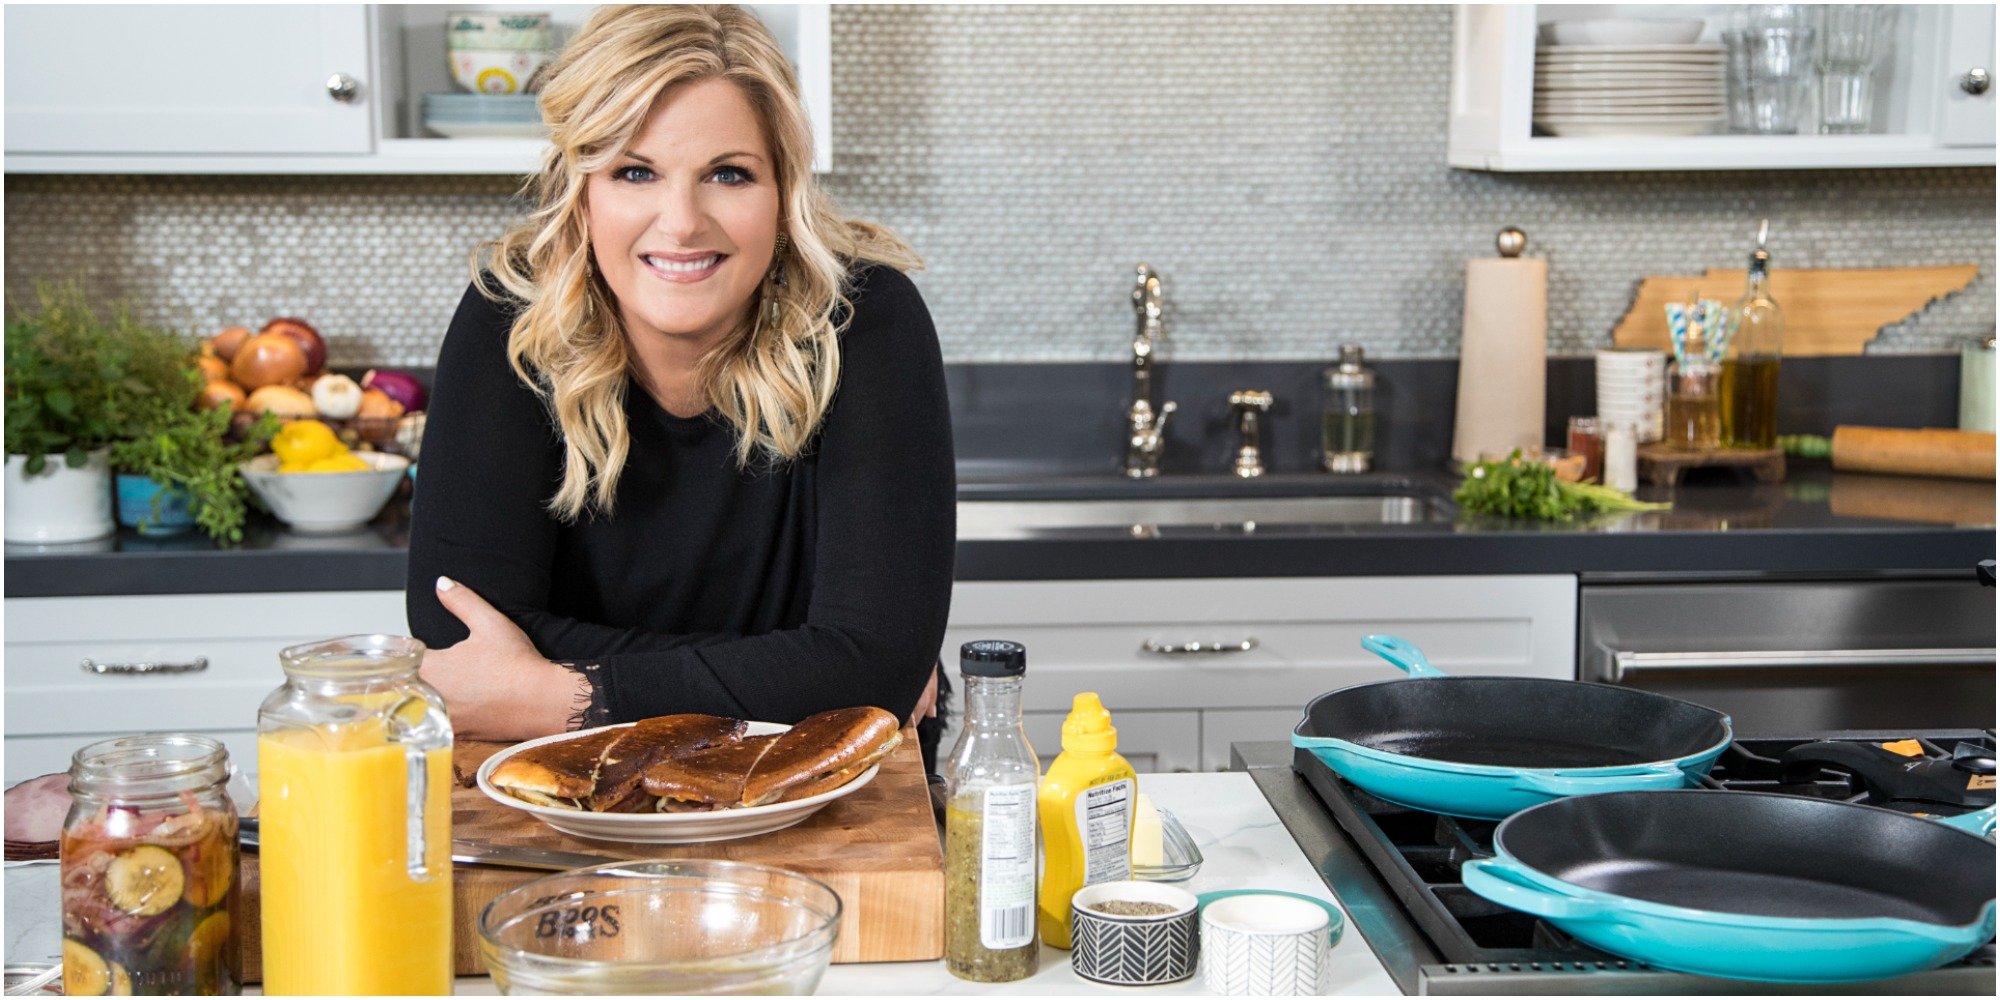 Trisha Yearwood poses on the set of her Food Network Show where she made Chicken Pot Pie burgers.